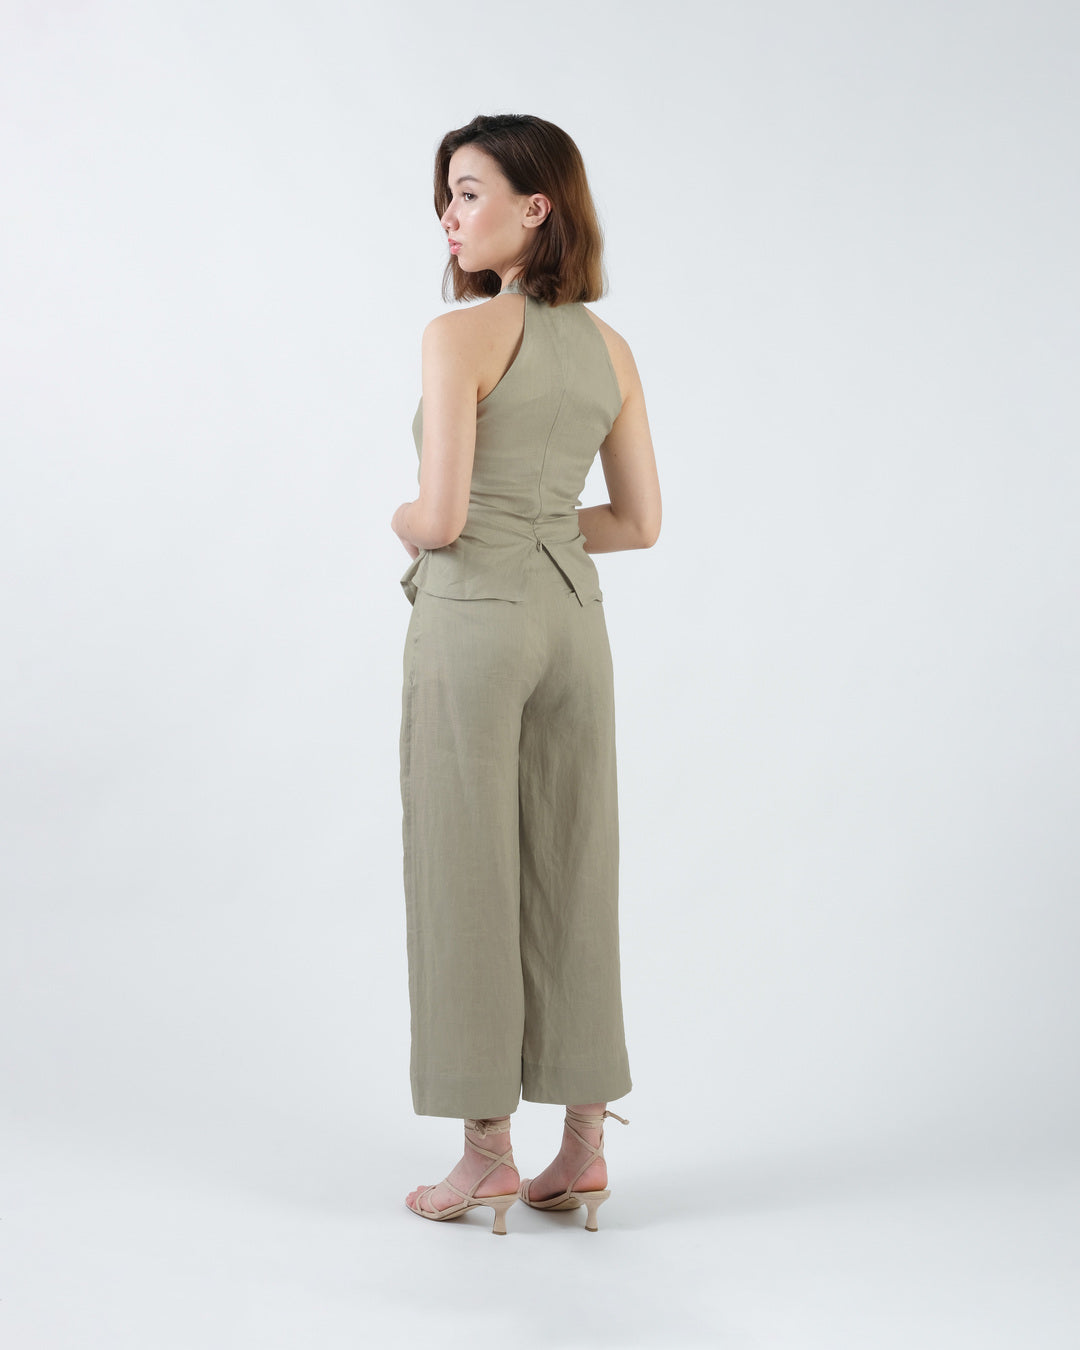 EASY CULOTTES in taupe